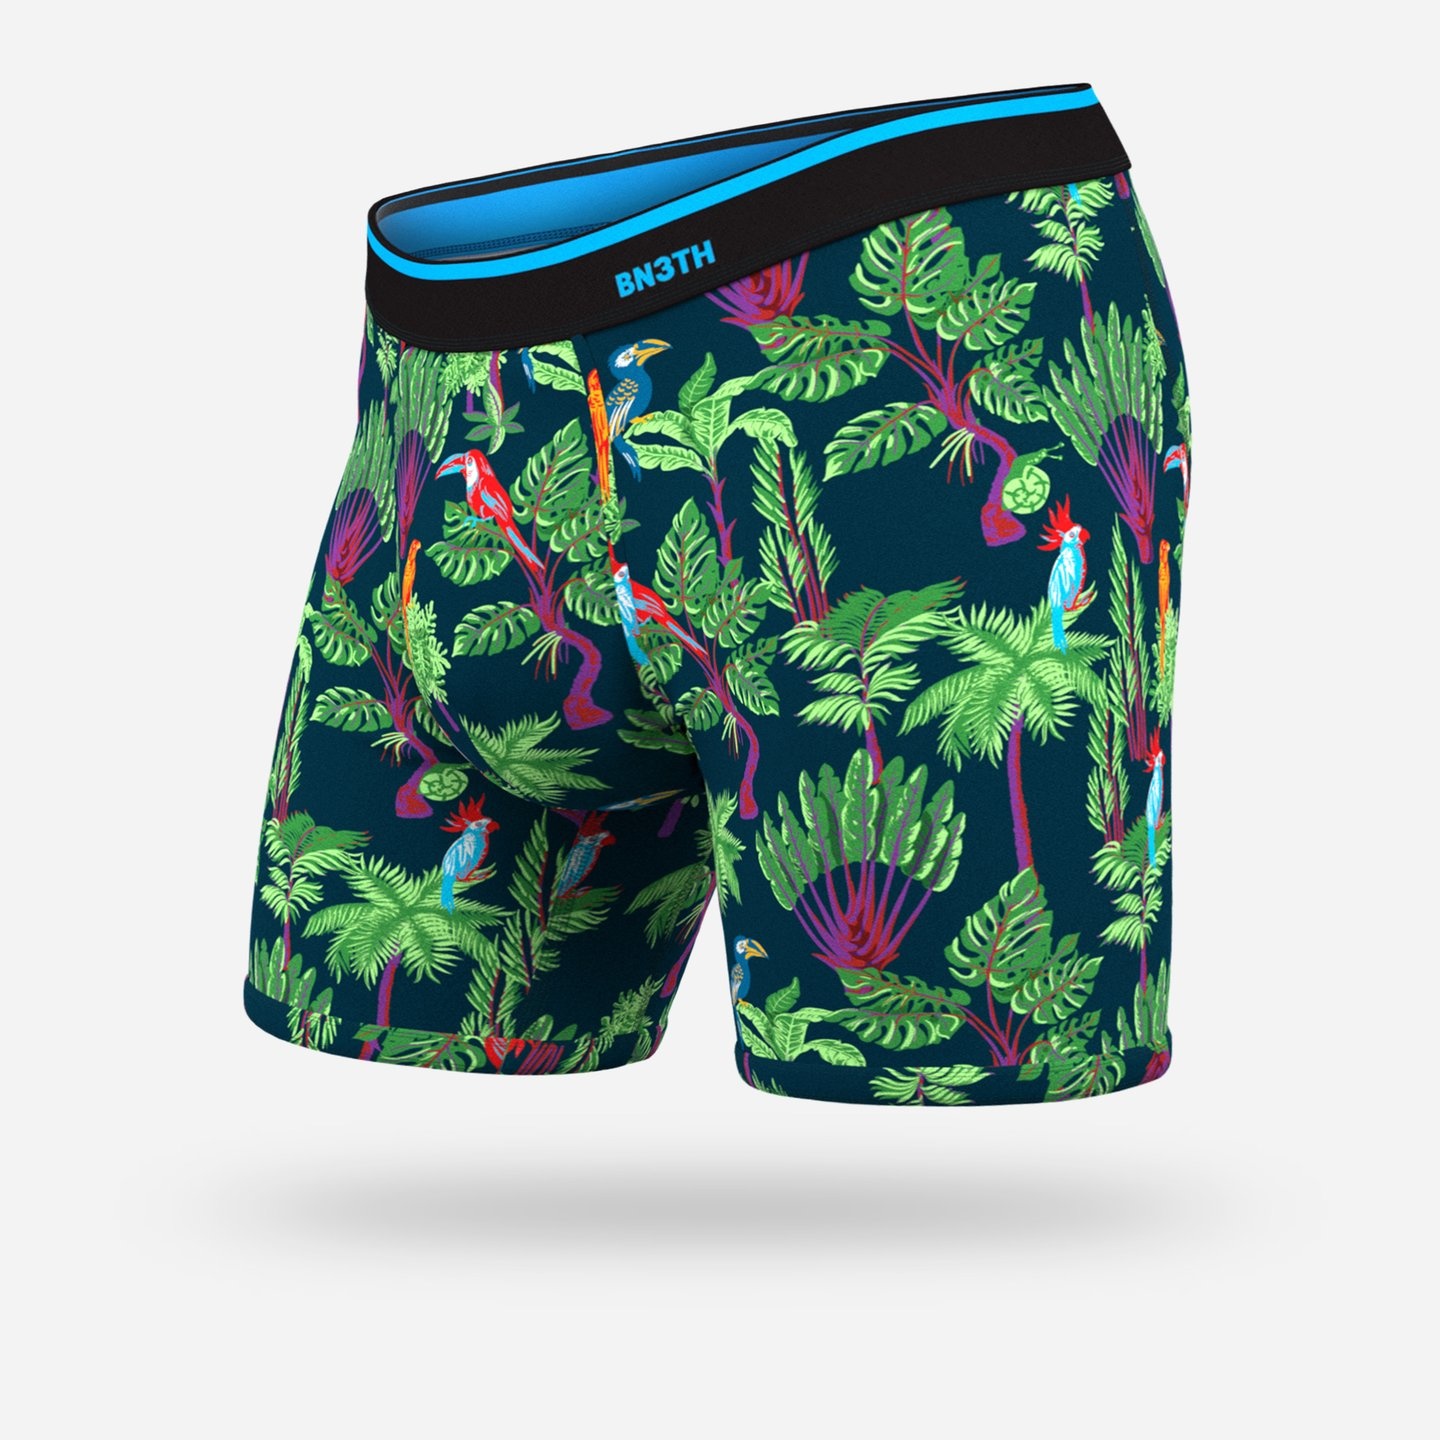 BN3TH Classic Boxer Brief New - Monashee Outdoors